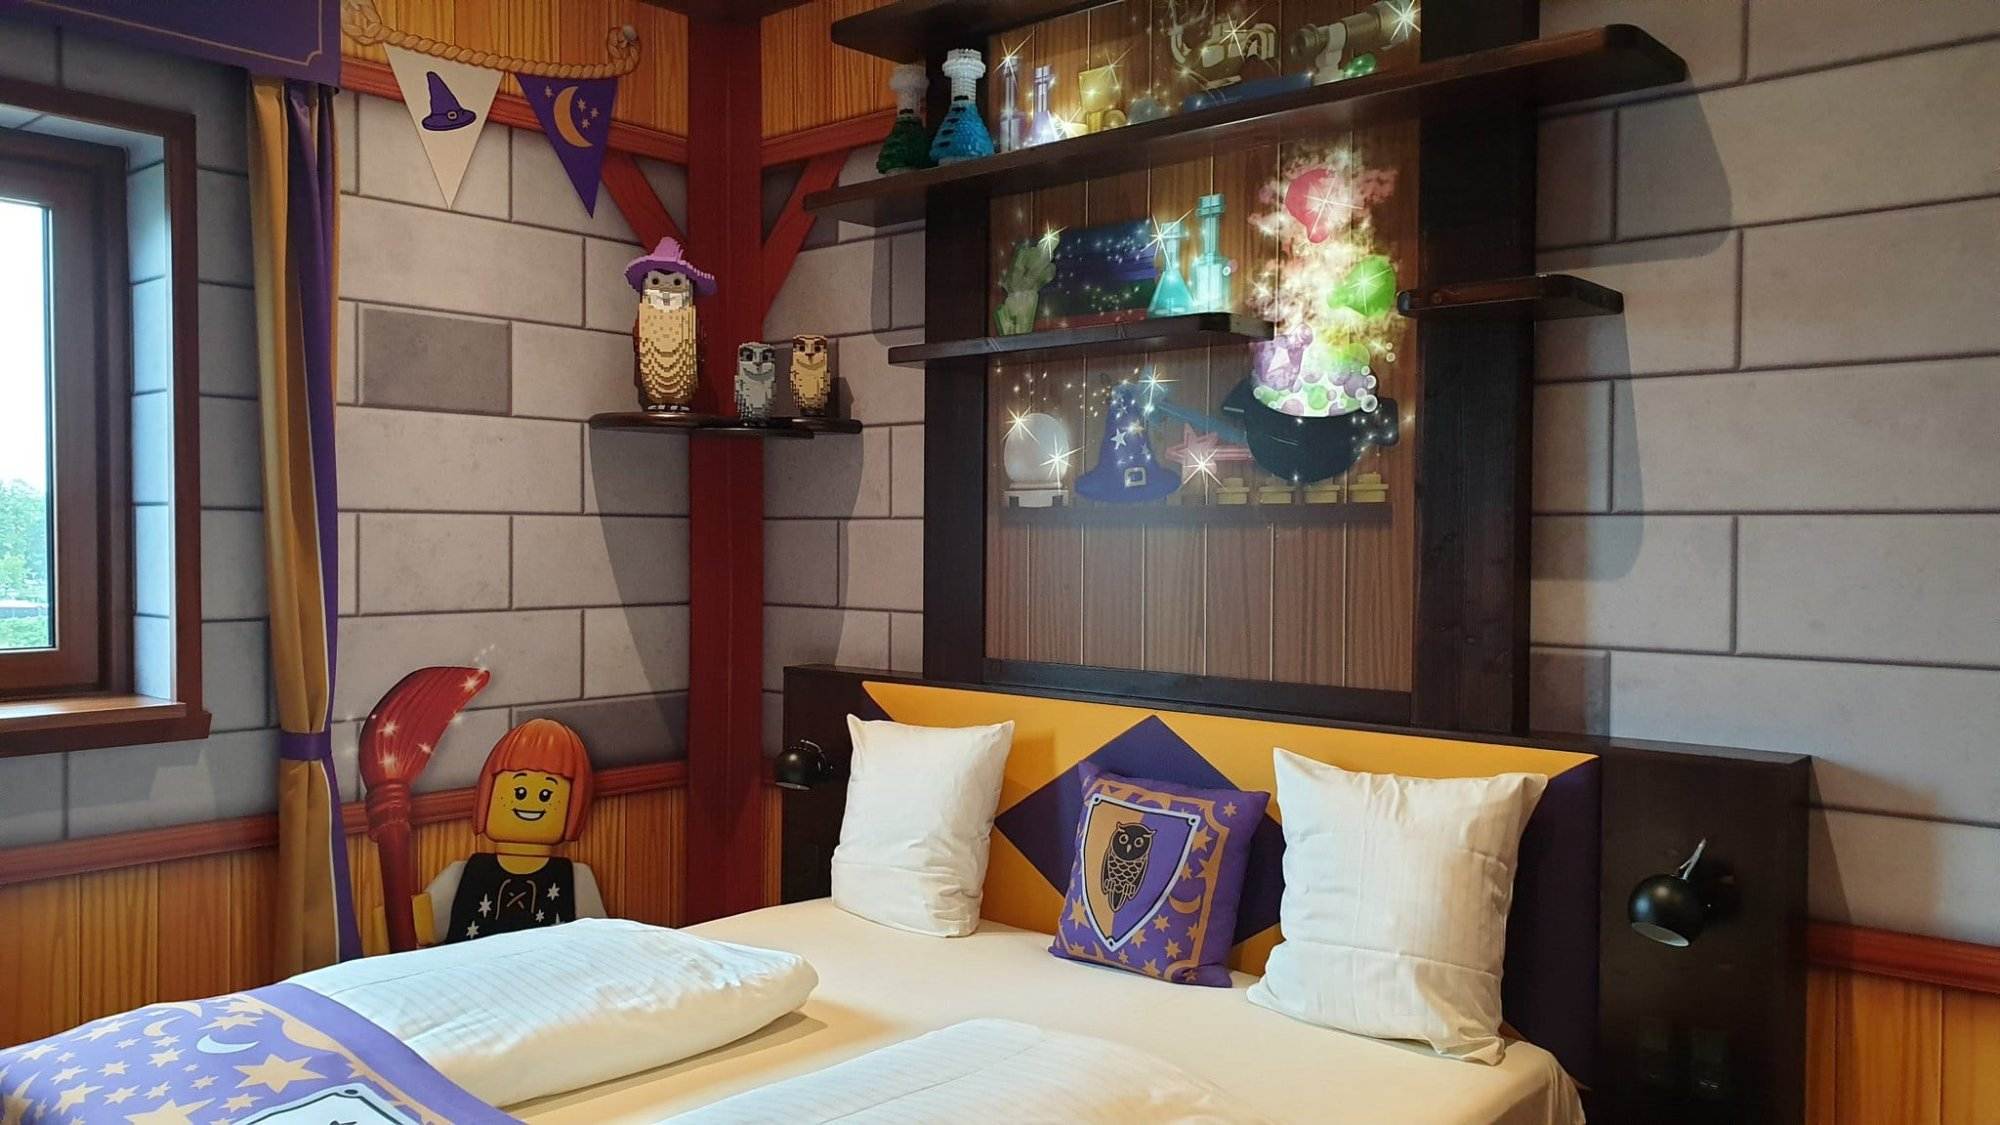 The theme rooms are nicely decorated with Lego buildings! Lego monkeys swing through the Pirate Room and there are parrots in the Adventure rooms.